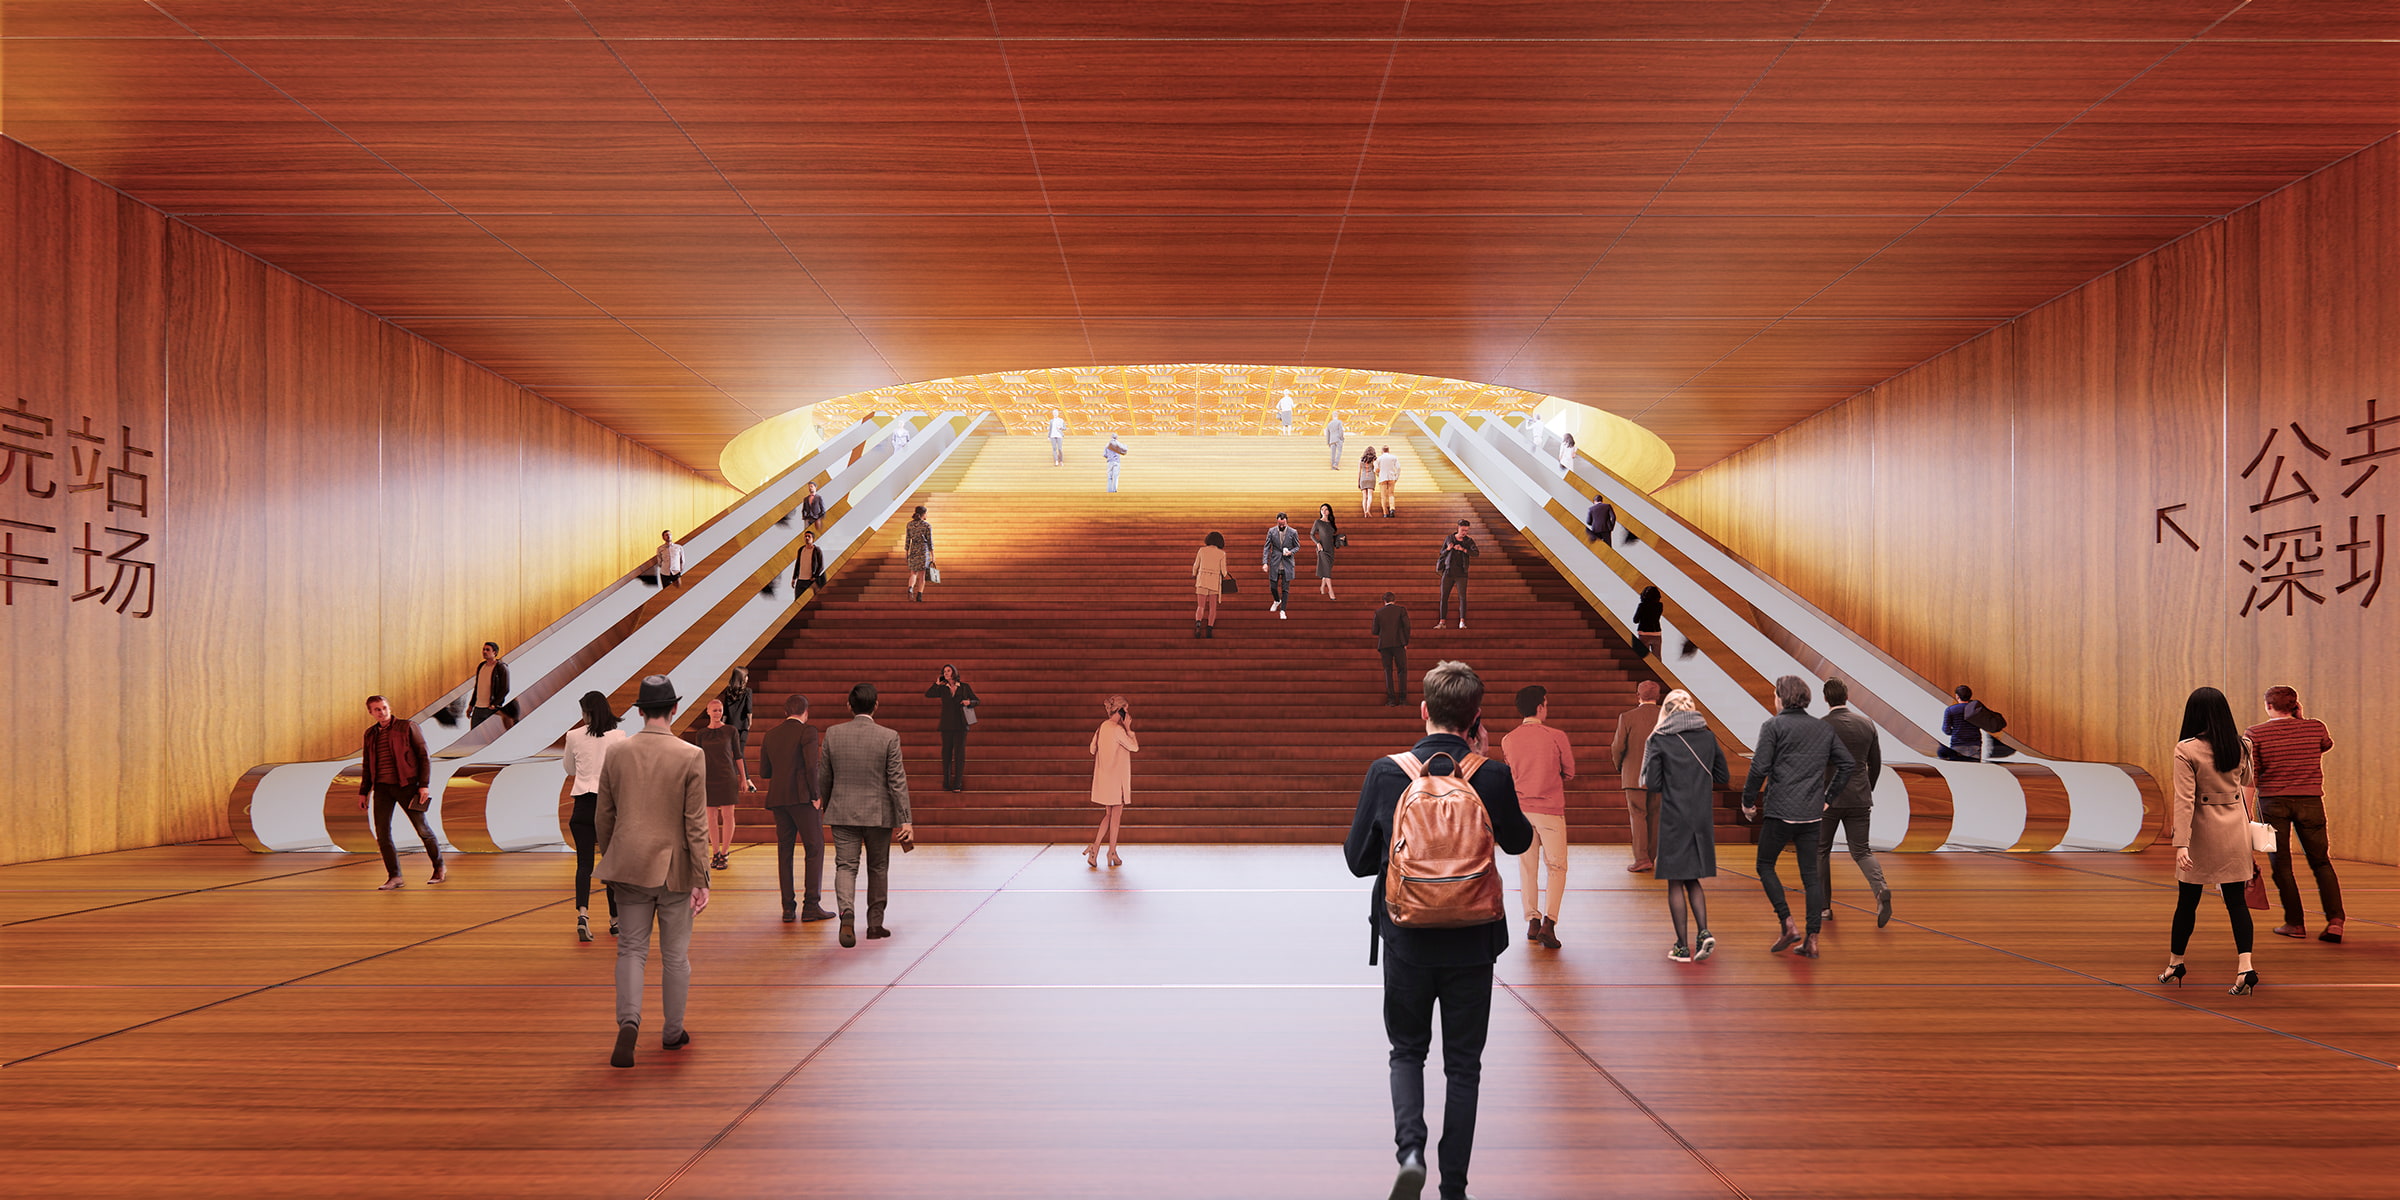 A visualization of the grand entry into the Shenzhen Opera House's Gallery.